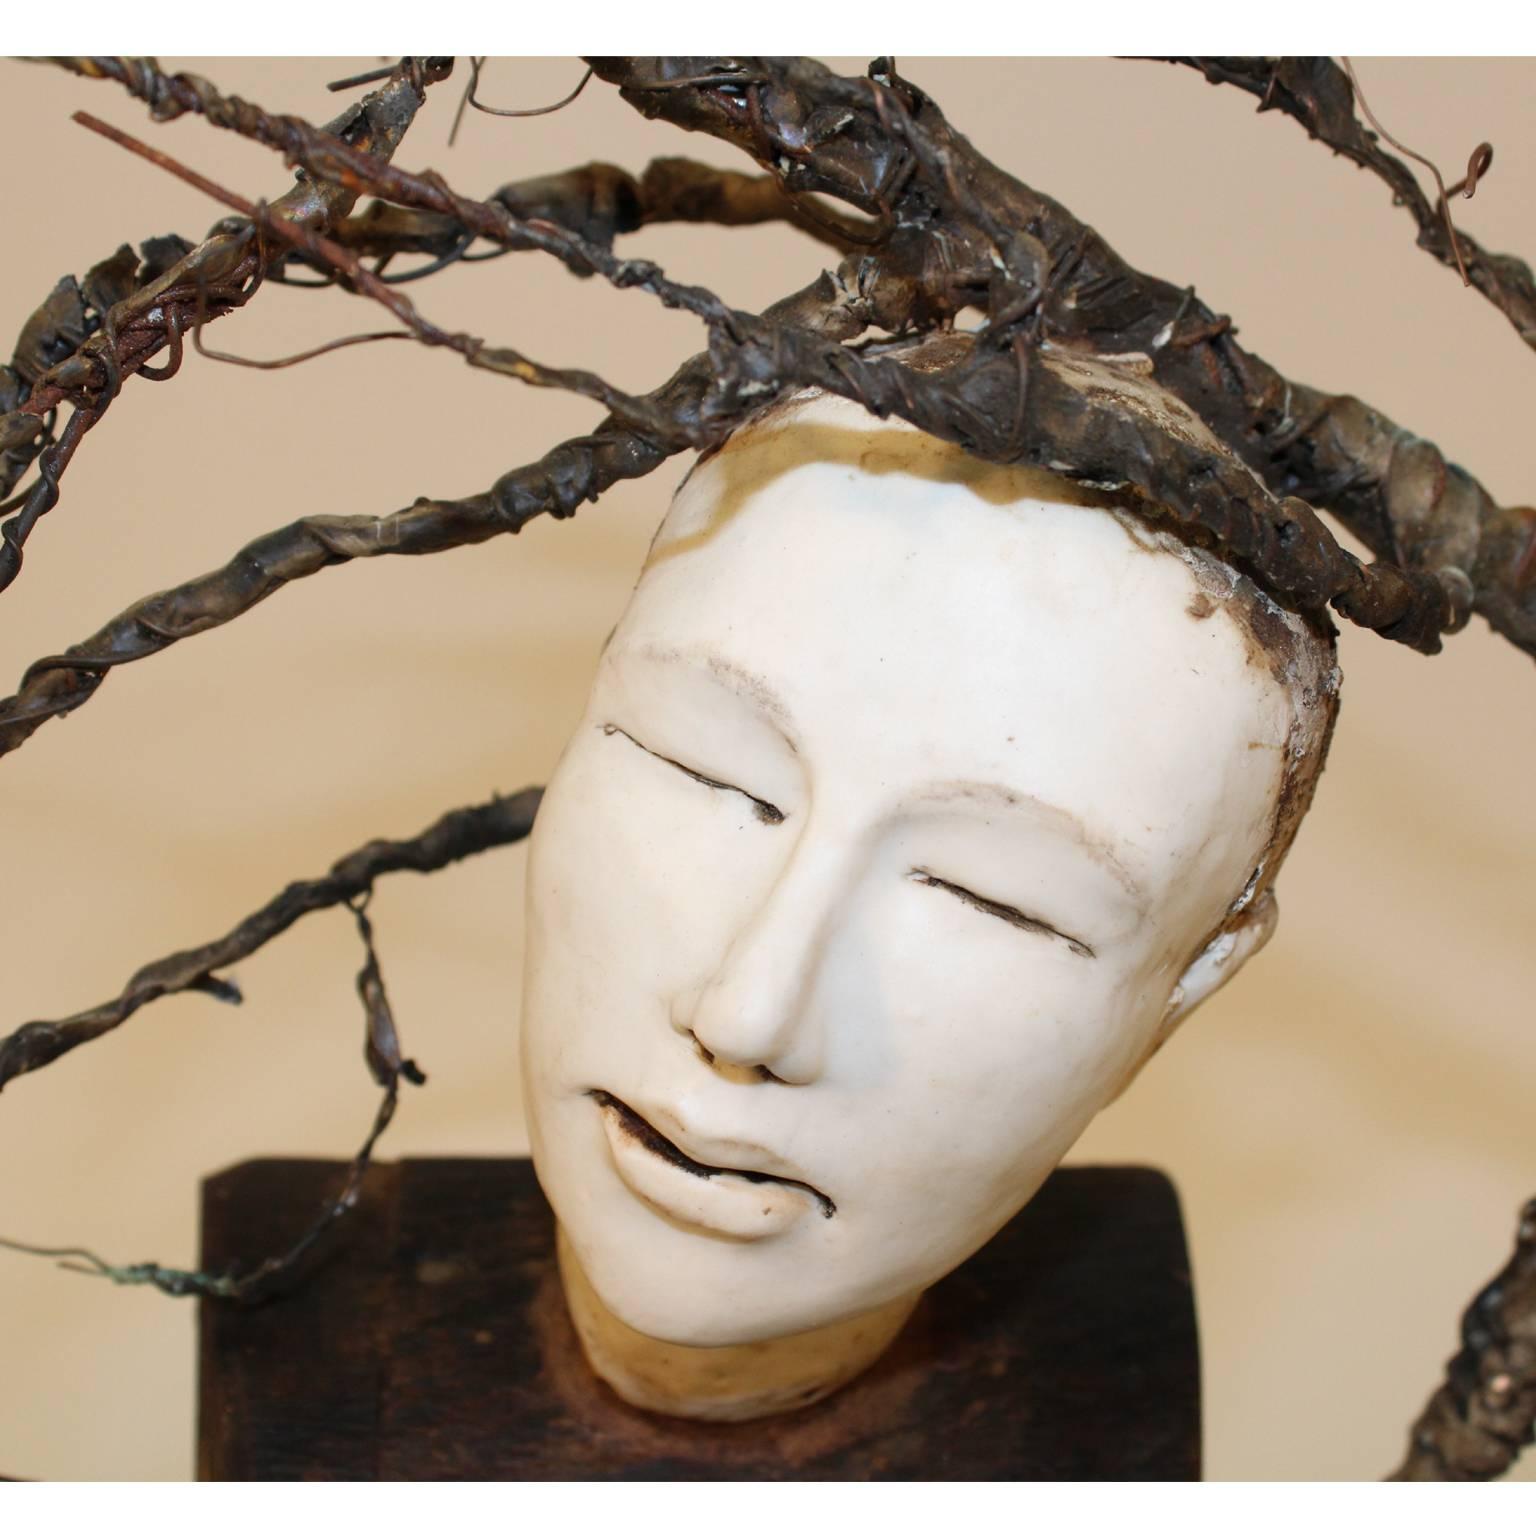 Contemporary Mixed-Media Sculpture by Cathy Rose